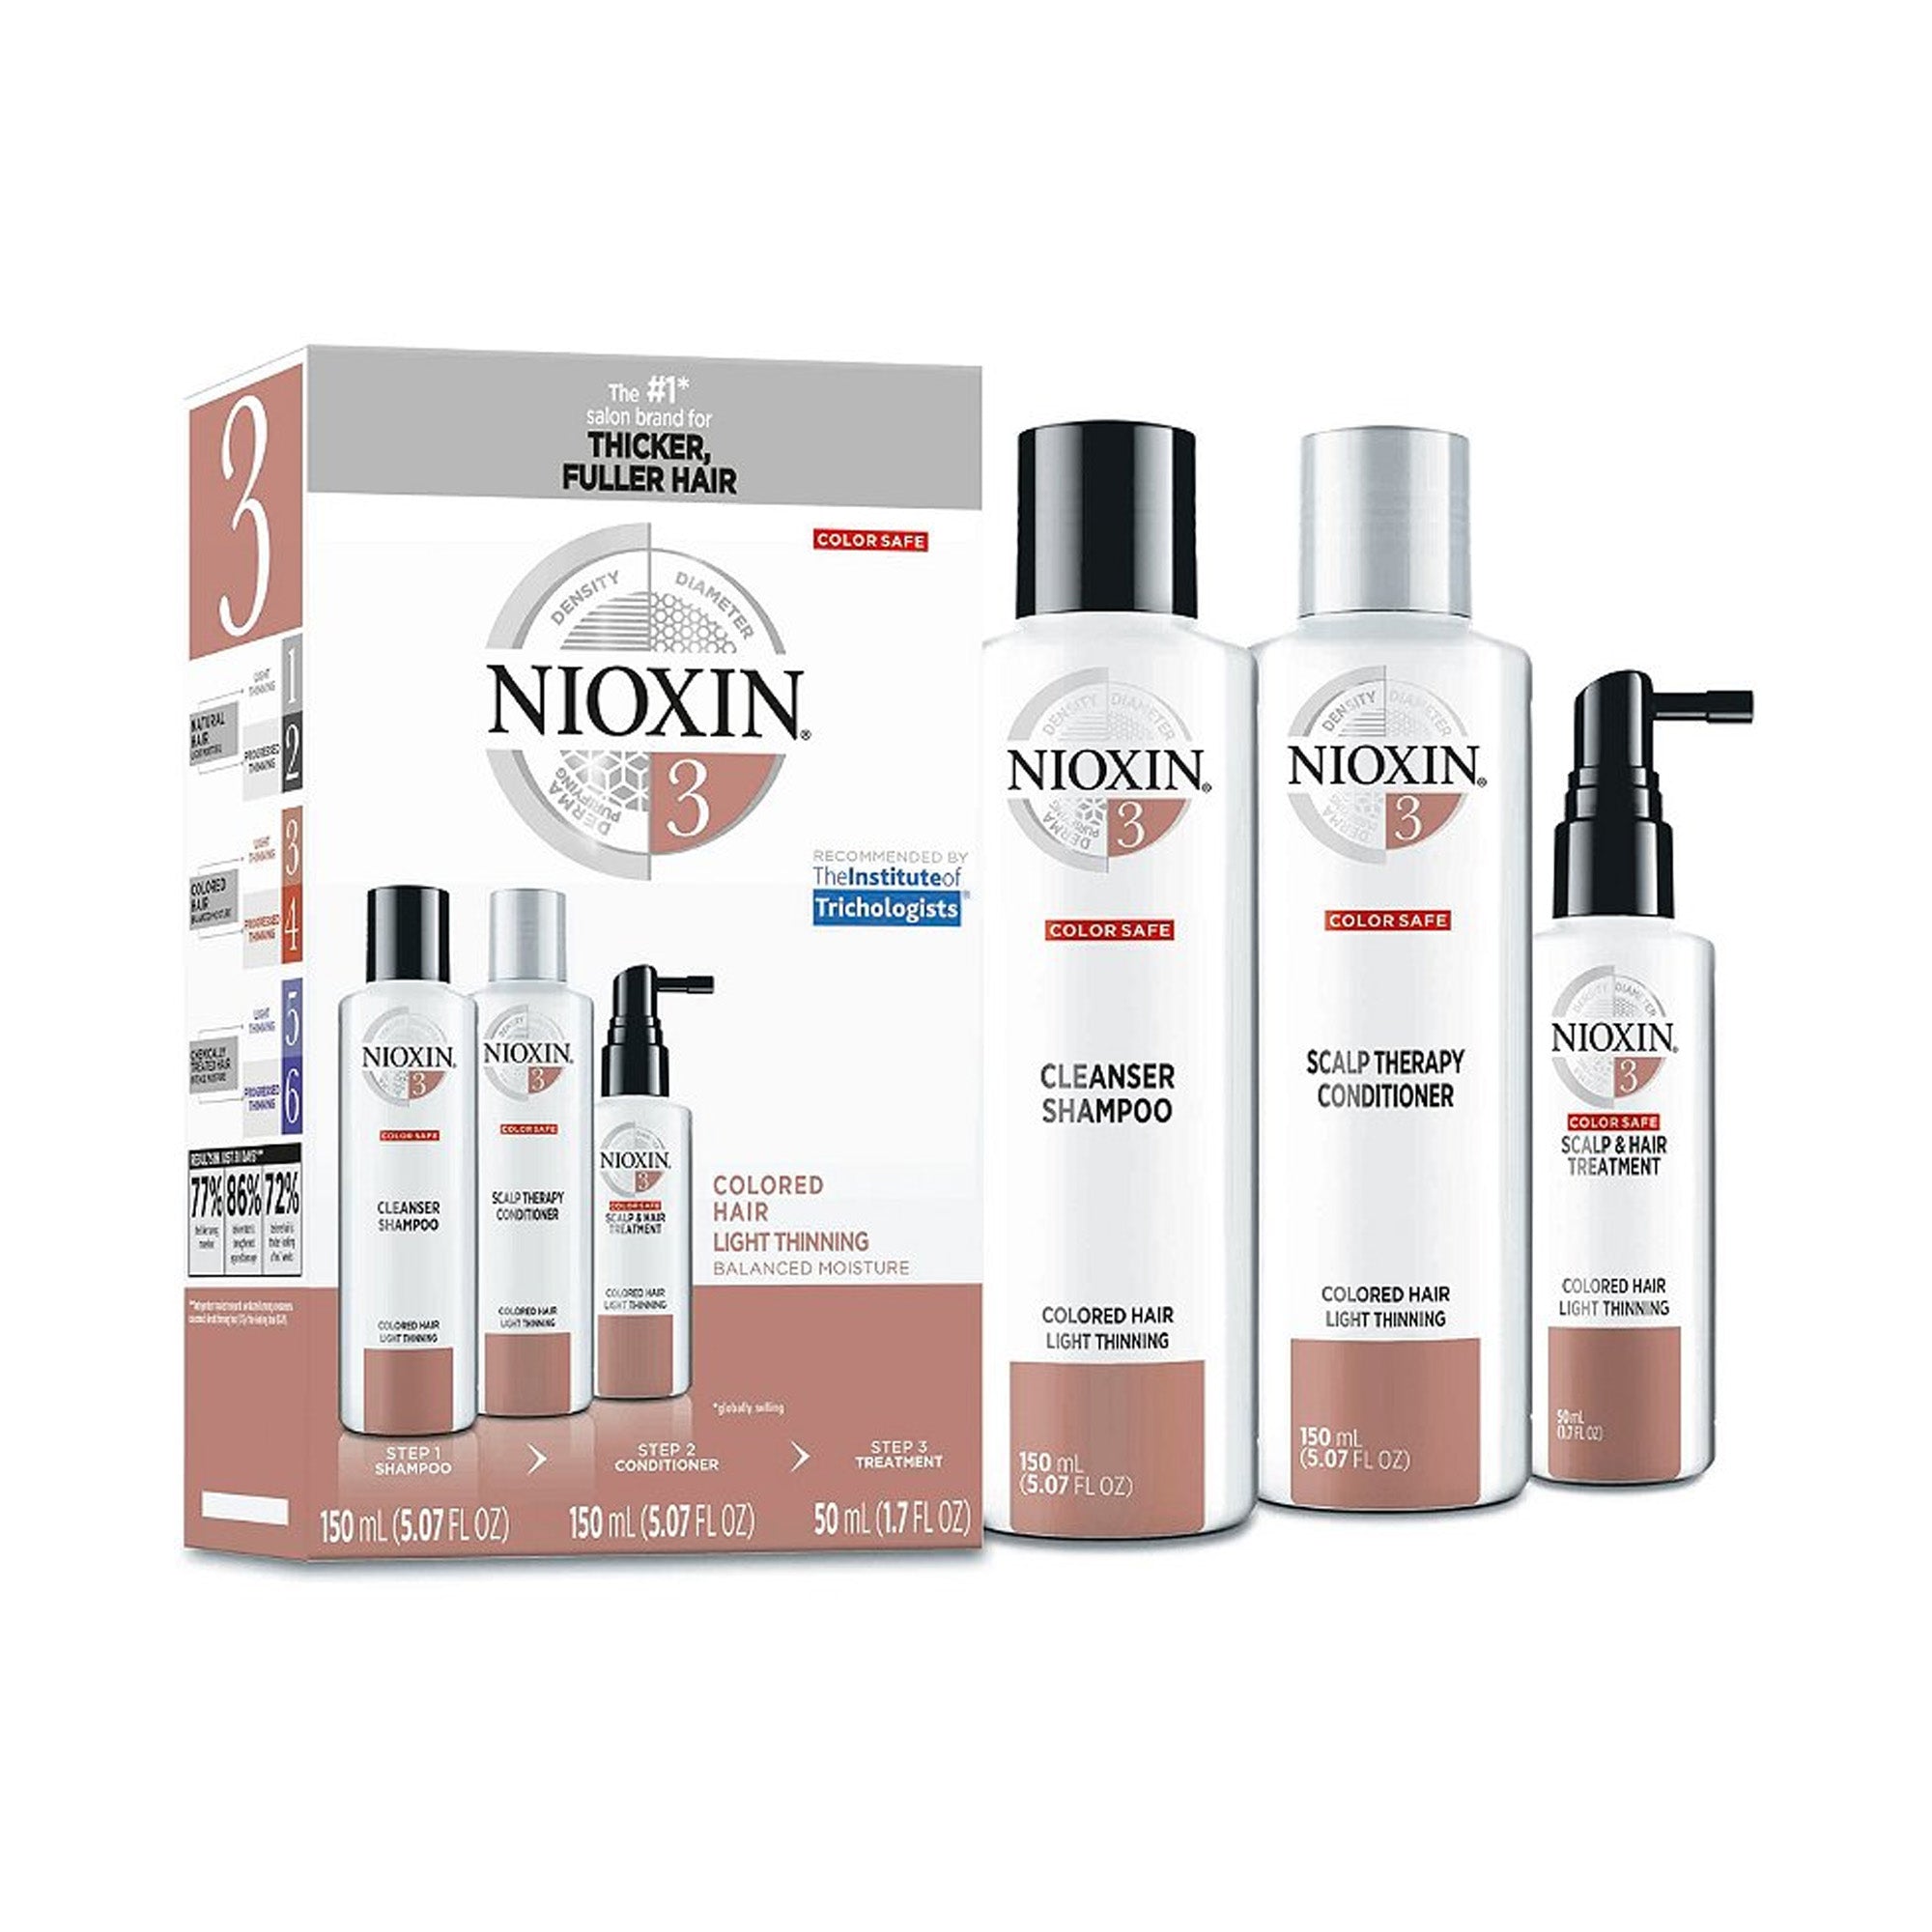 Nioxin Hair Care Kit System 3, Color Treated Hair with Normal to Light Thinning